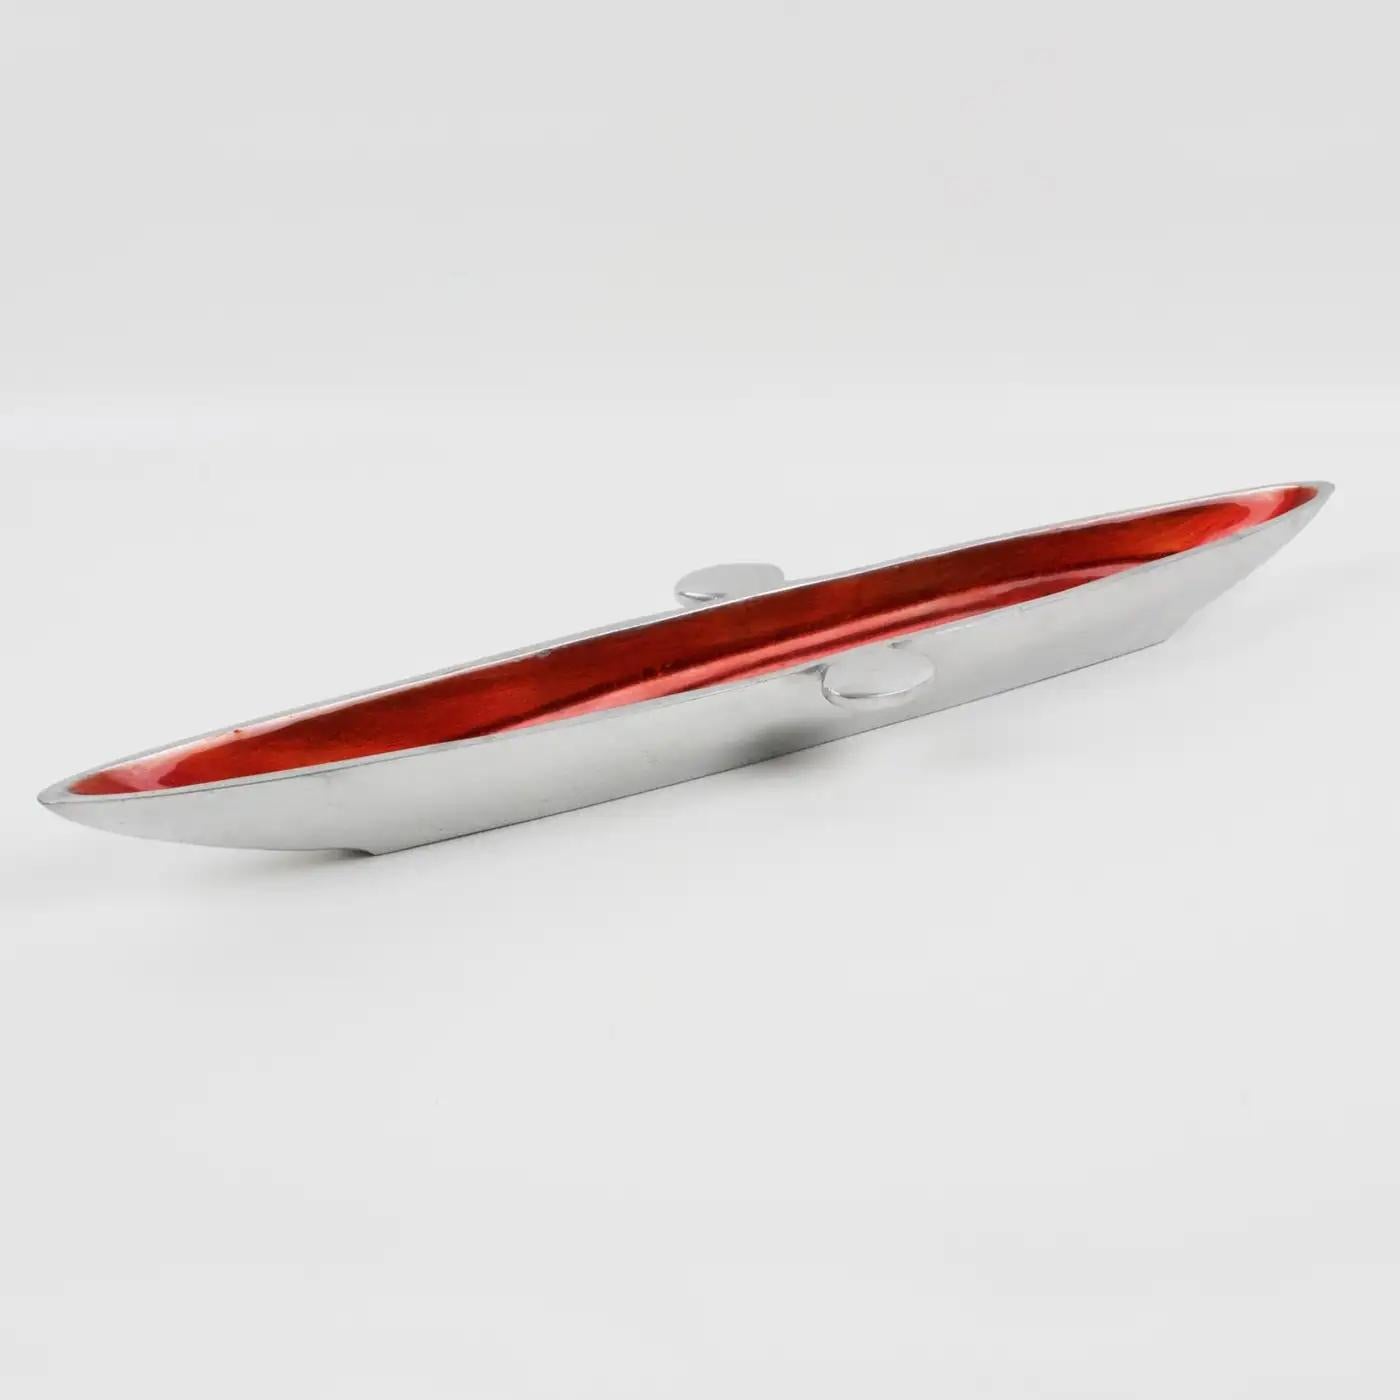 This striking modernist Space Age aluminum bowl, vide poche, was crafted in the mid-20th century in France. The elongated canoe-shaped piece has a typical spatial ship design. The catchall is polished cast aluminum and lined with a bright red-orange